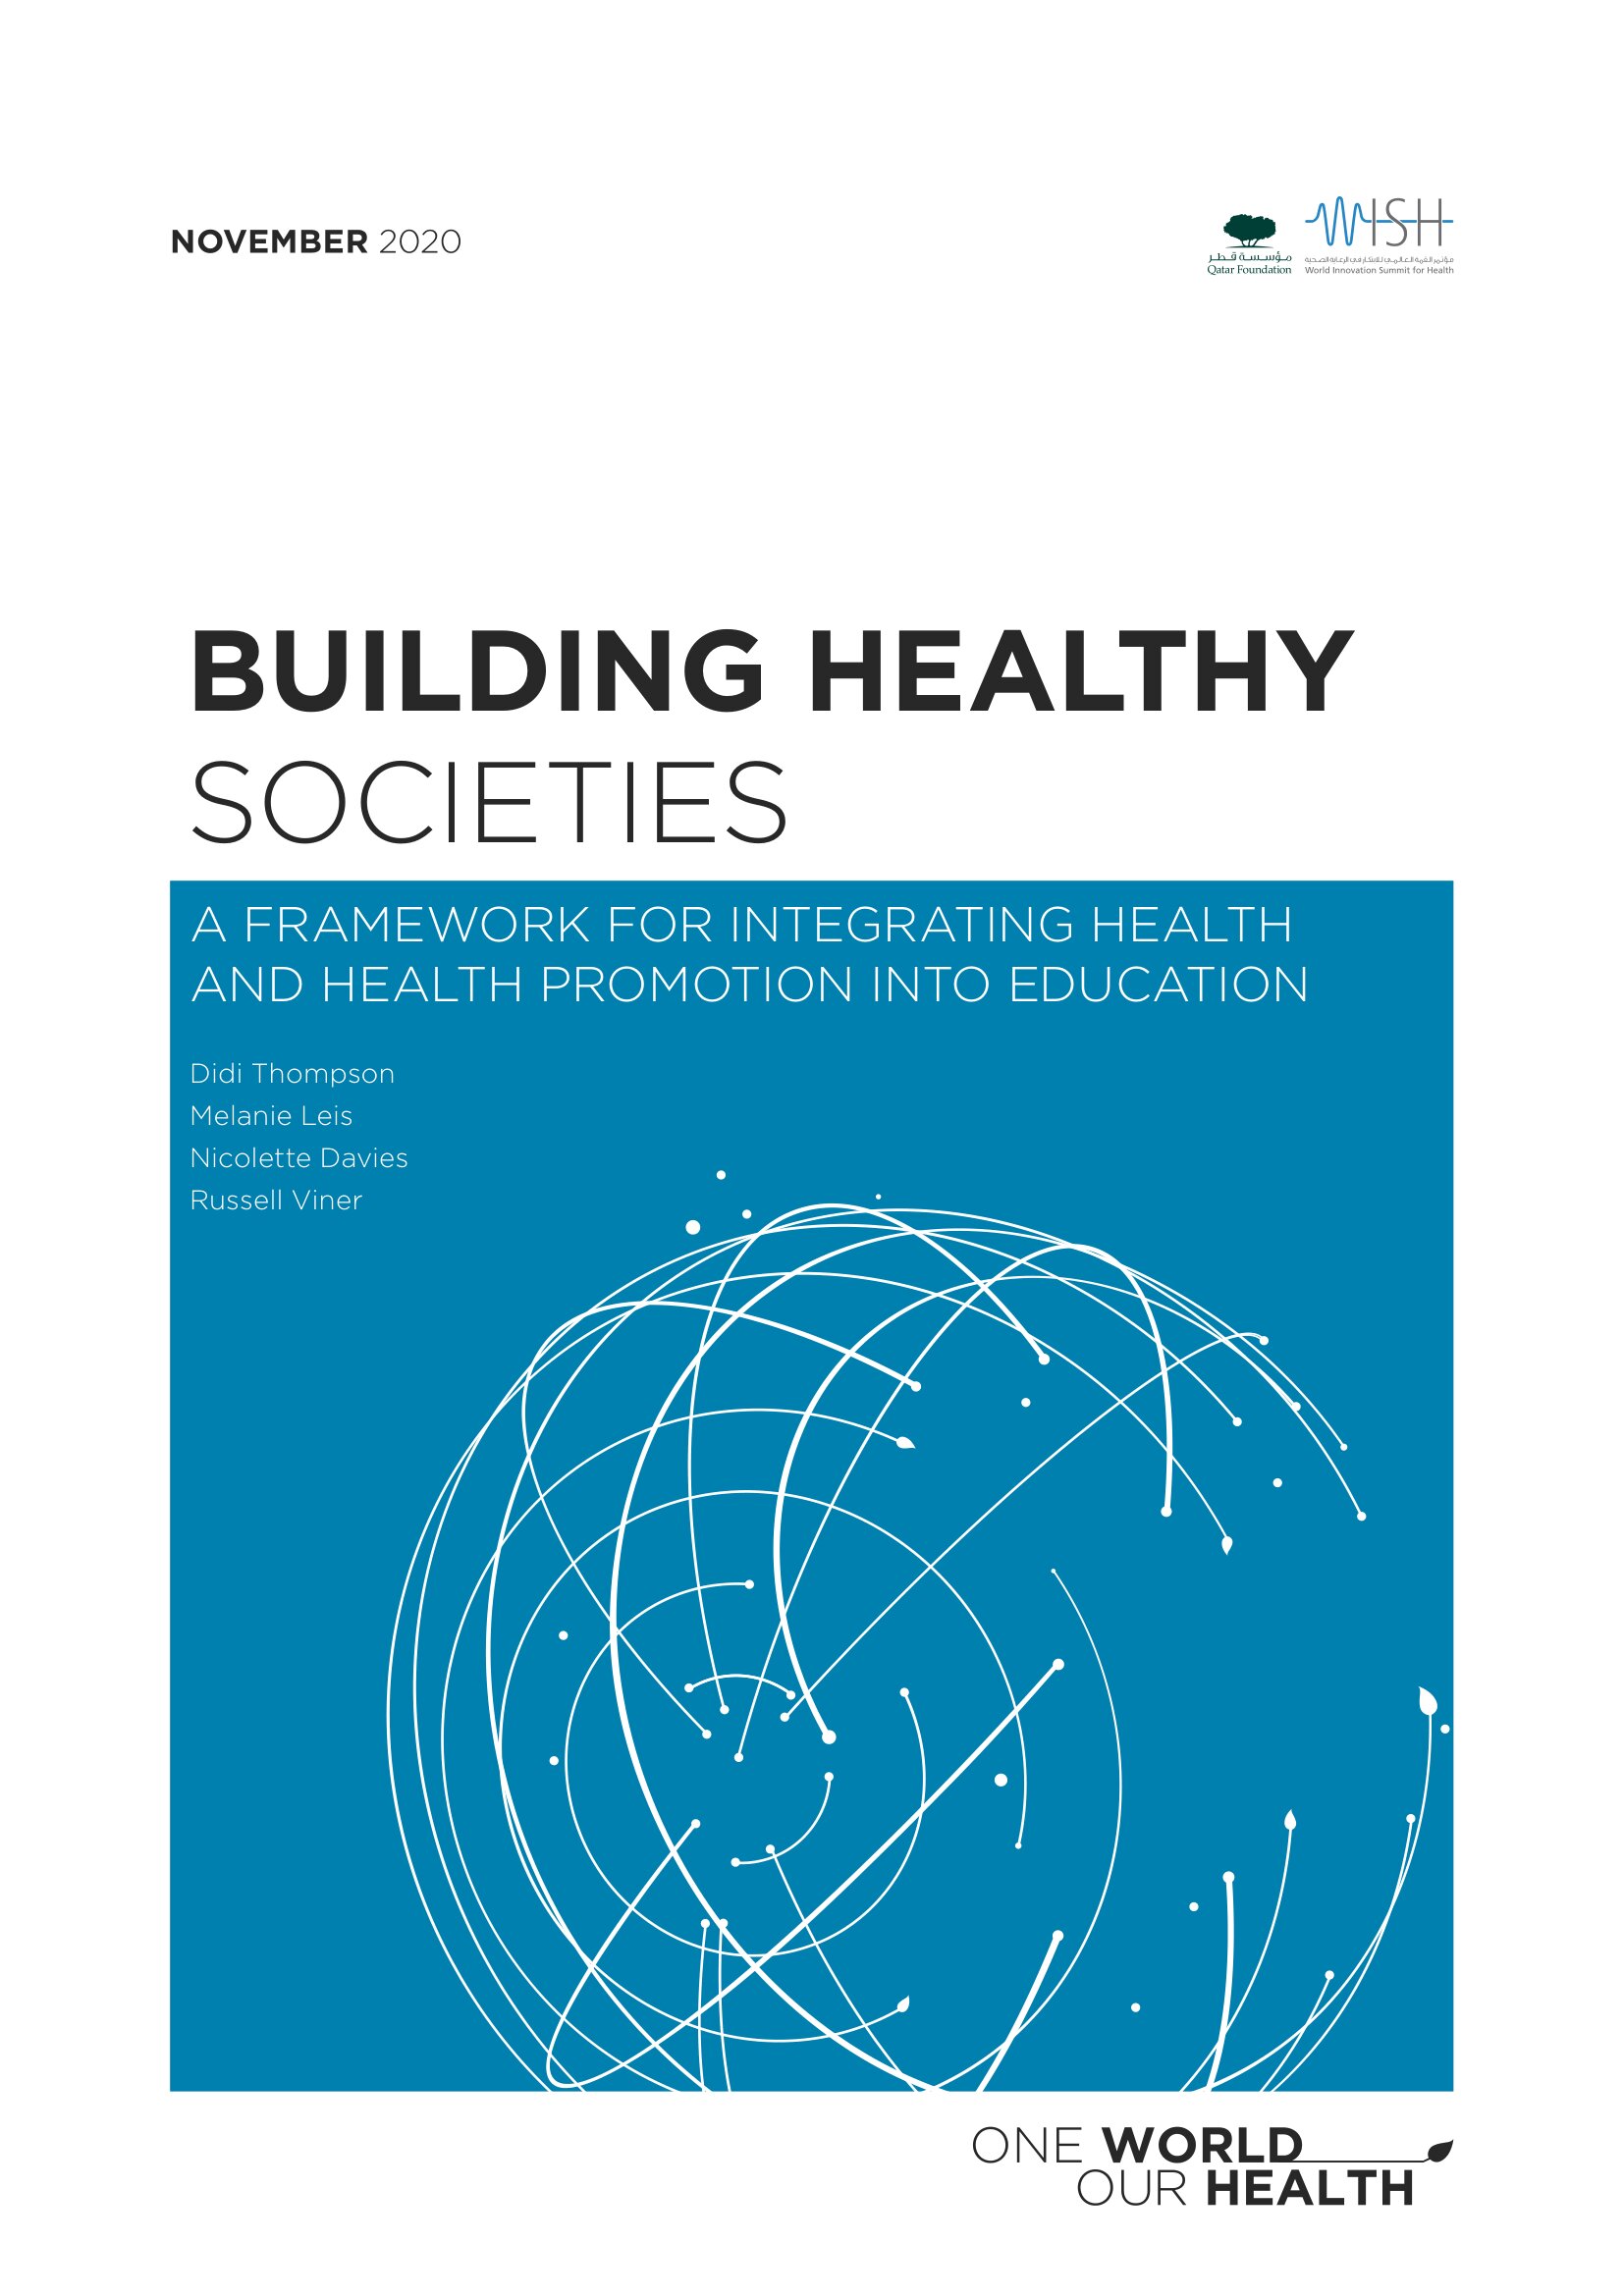 Building Healthy Societies: A framework for integrating Health and Health Promotion into Education